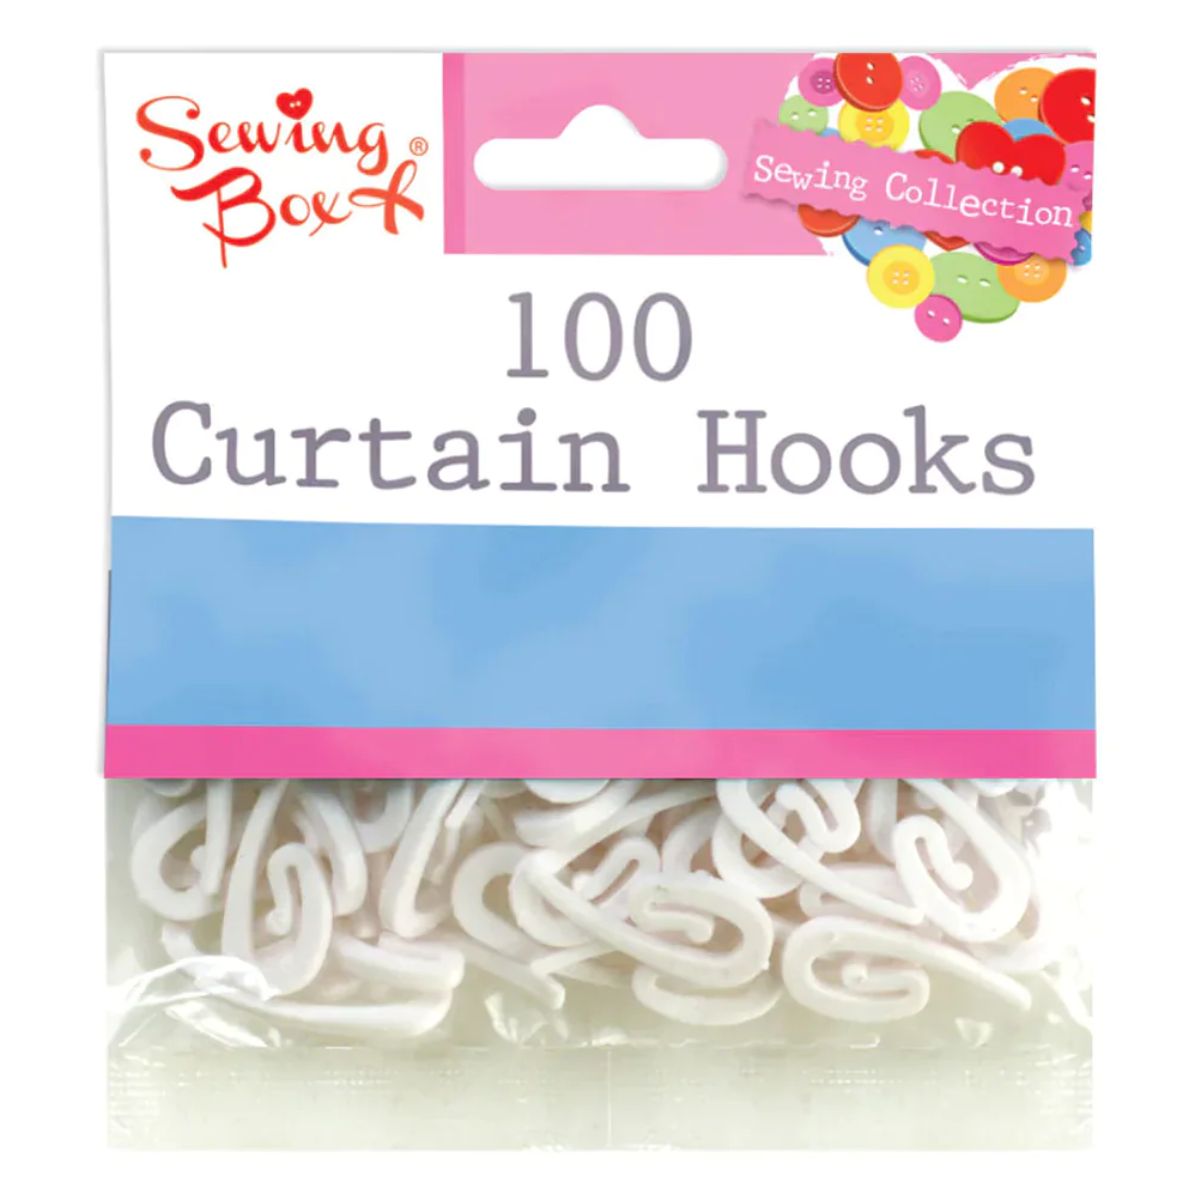 A package of 100 curtain hooks from the Sewing Box - Pack of 100 Curtain Hooks collection.